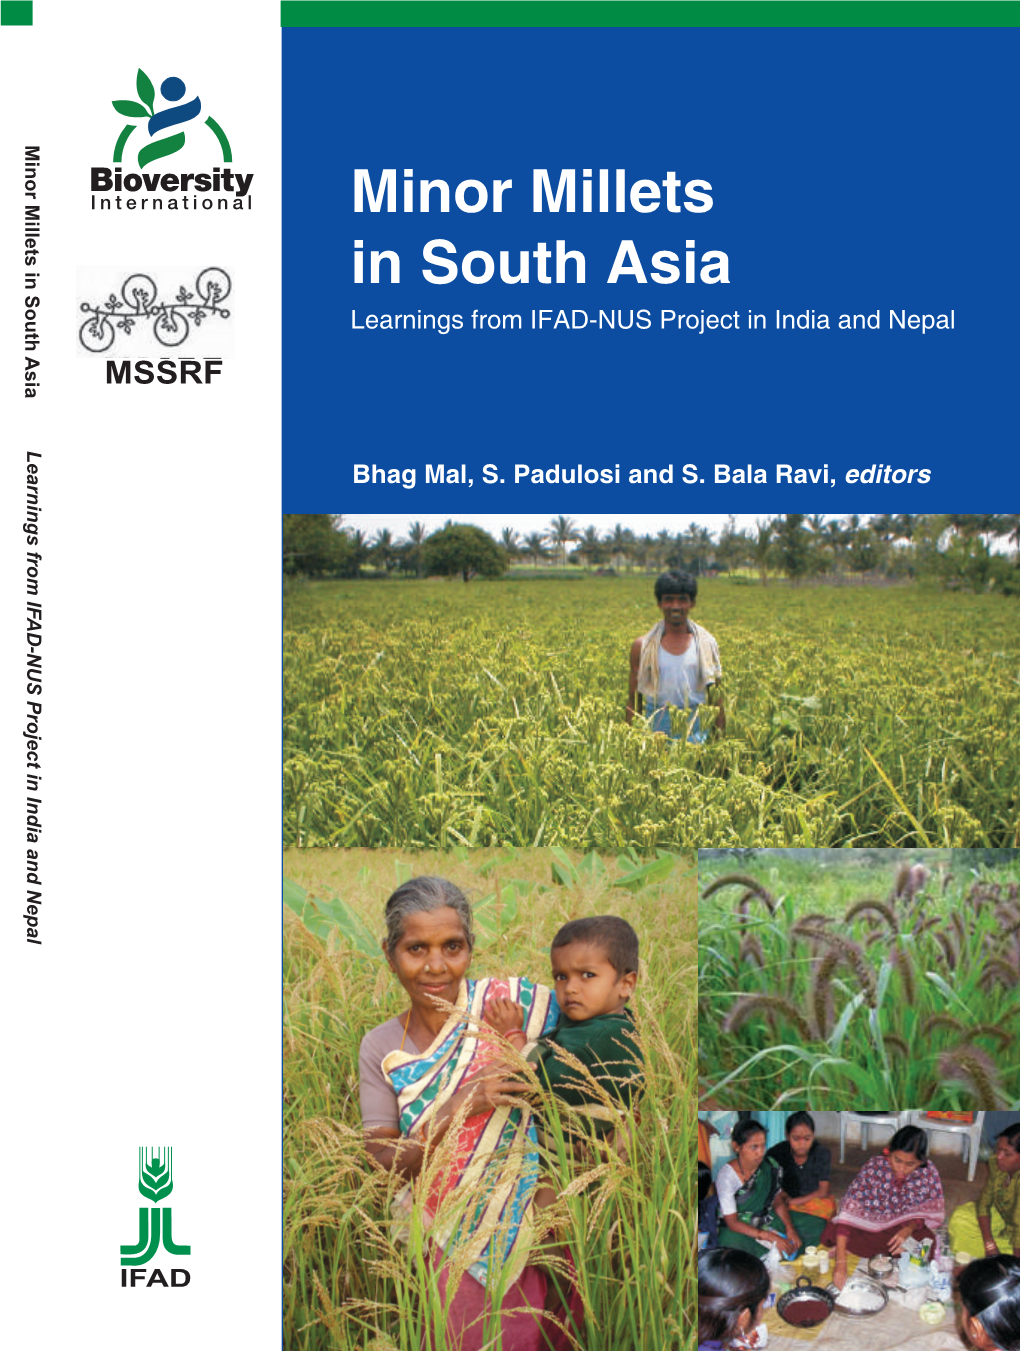 Minor Millets in South Asia: Learnings from IFAD-NUS Project in India and Nepal